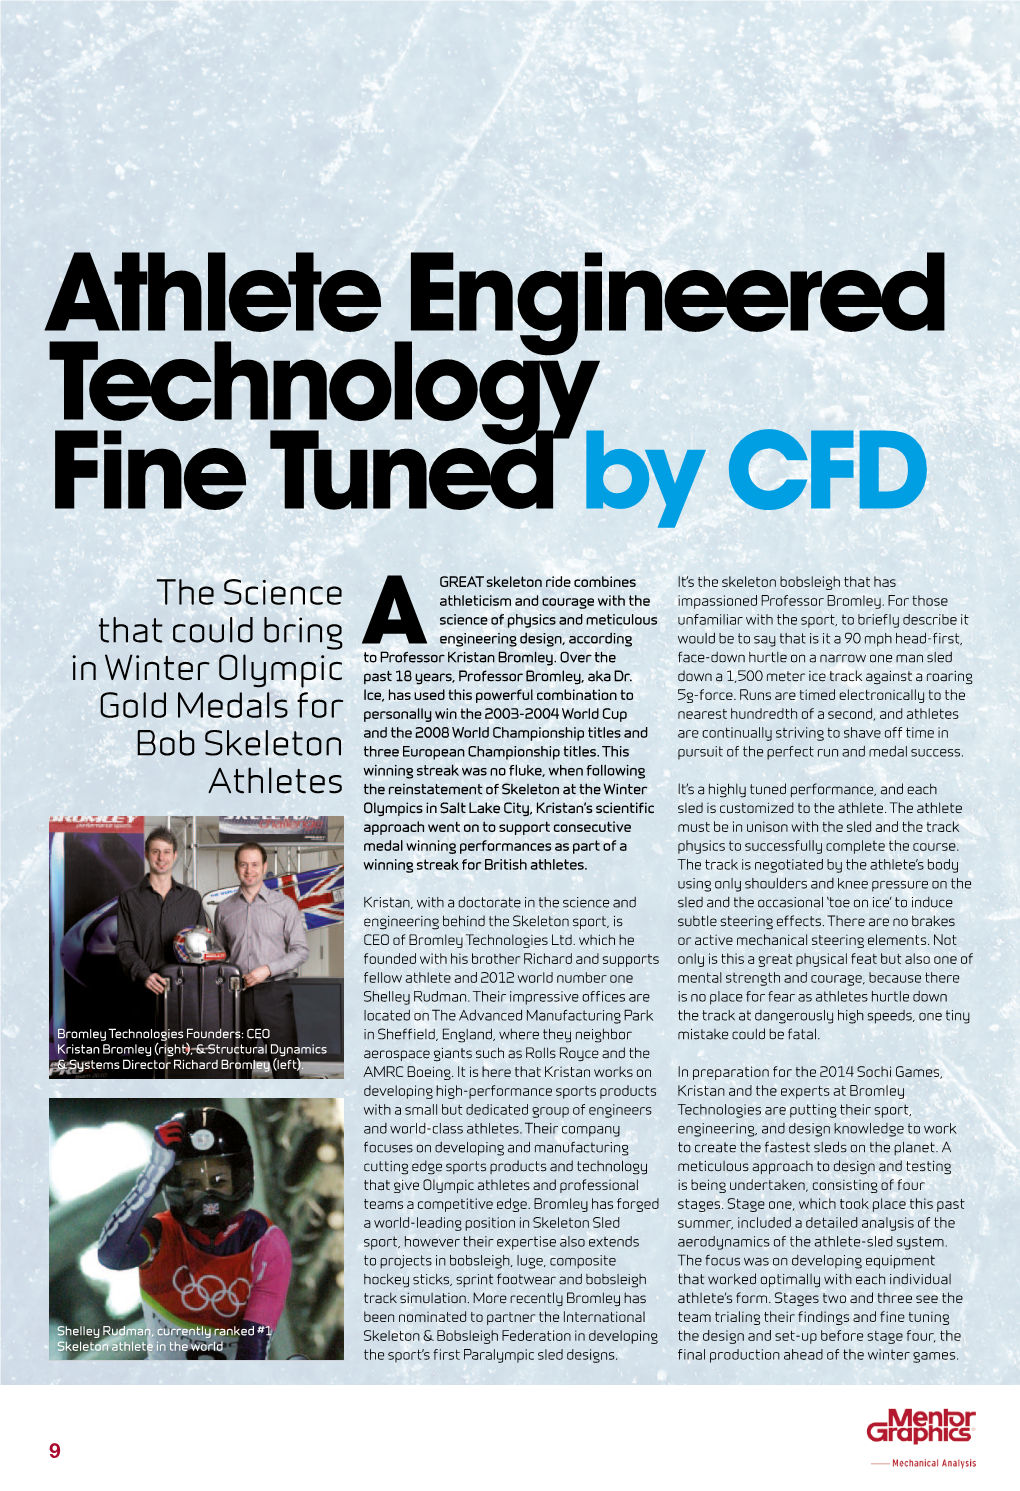 Athlete Engineered Technology Fine Tuned by CFD